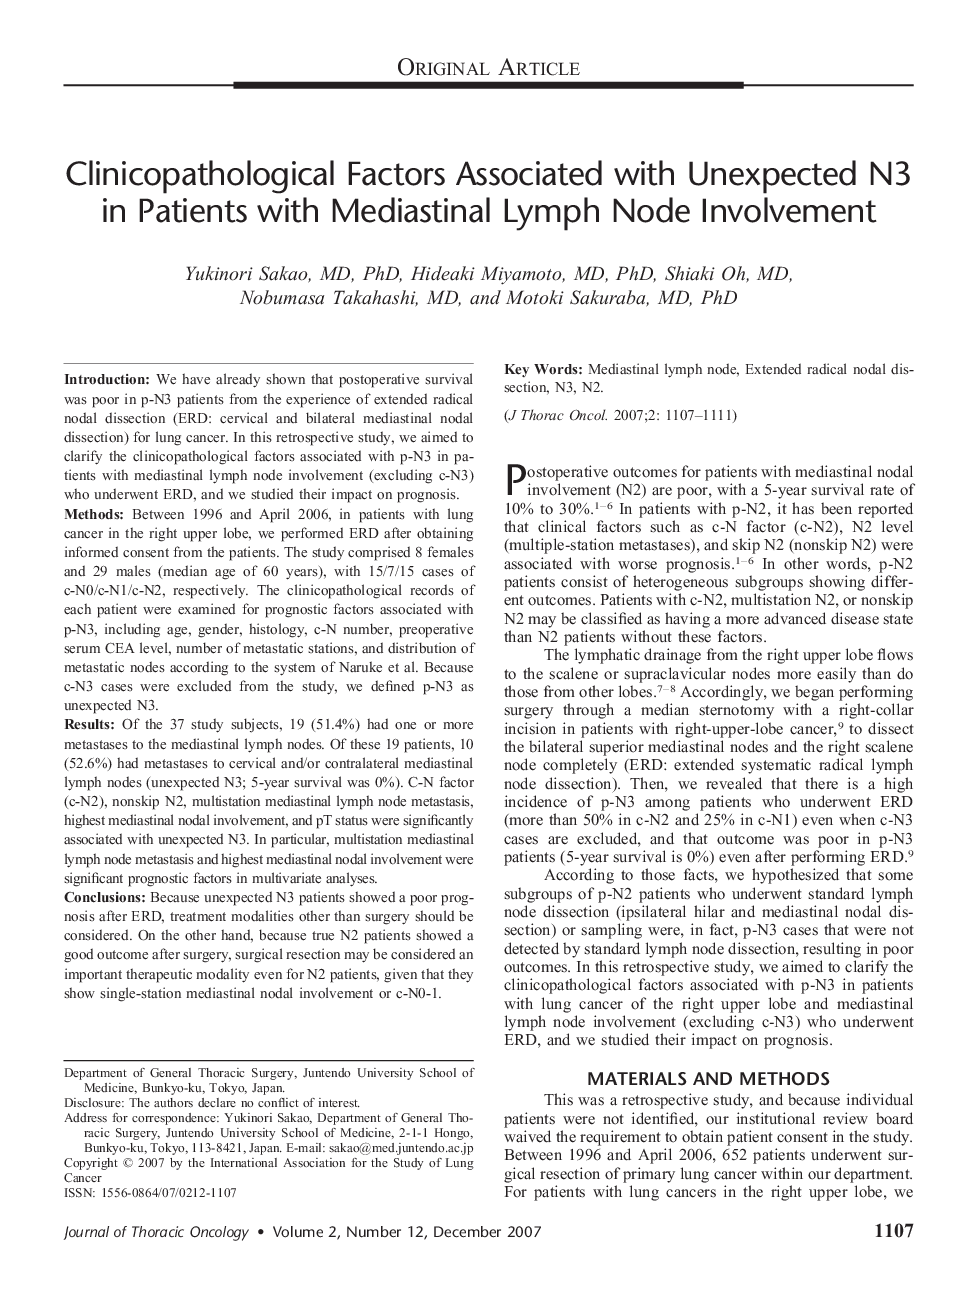 Clinicopathological Factors Associated with Unexpected N3 in Patients with Mediastinal Lymph Node Involvement 